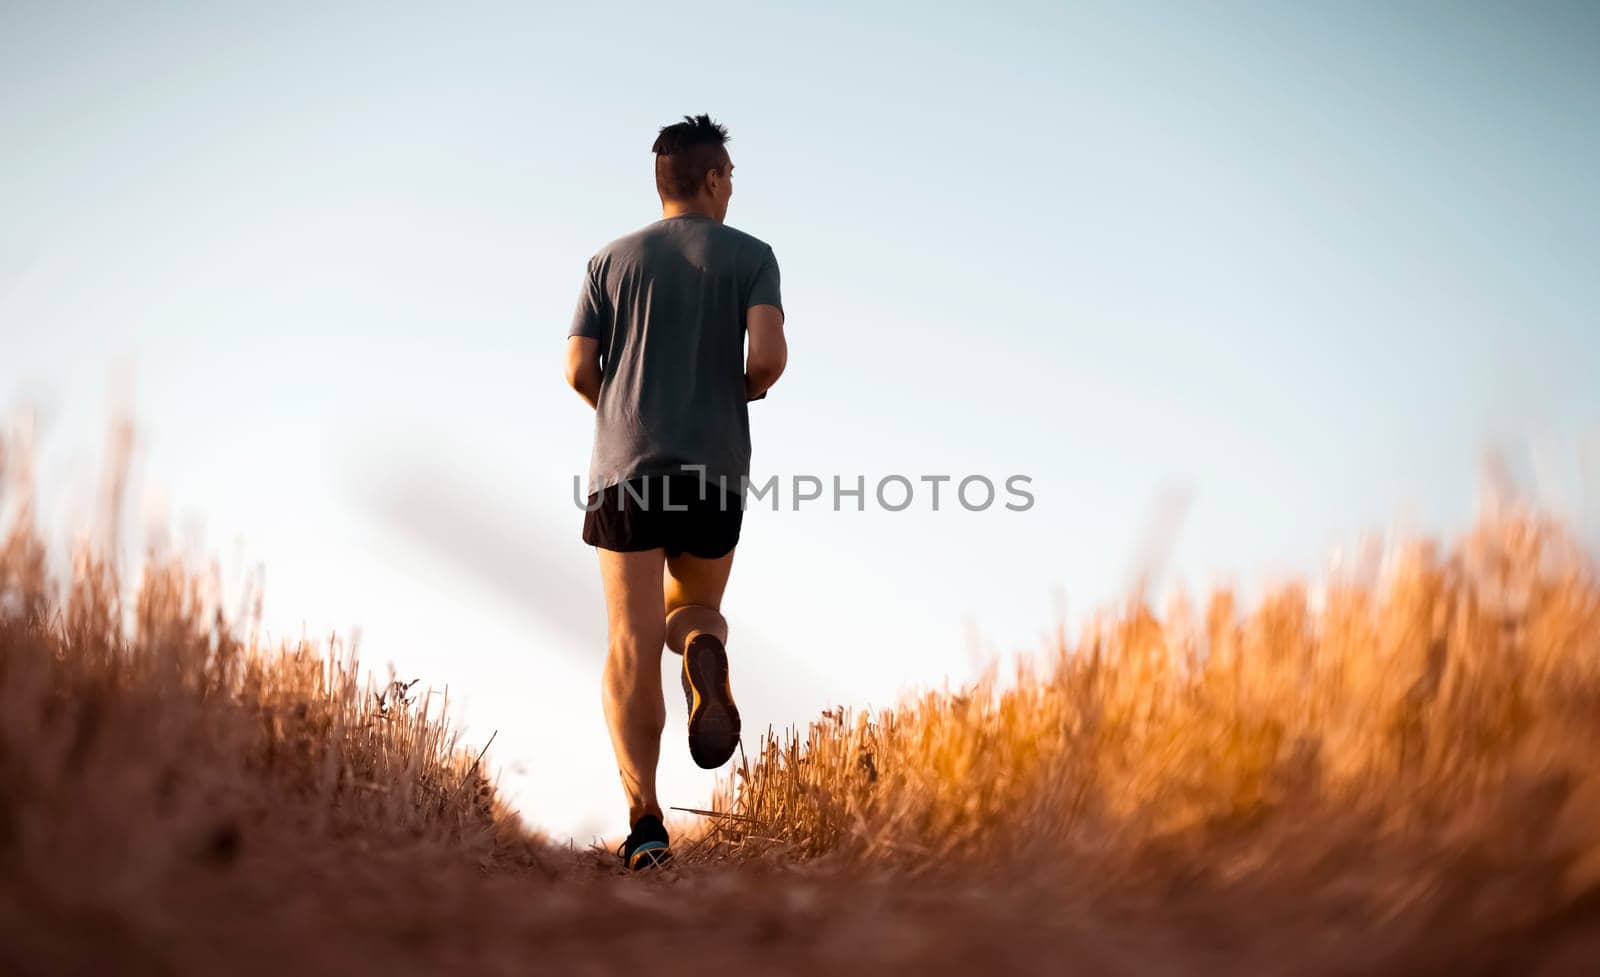 A young man jogging in the early morning at dawn, an athlete runs along the road through a wheat field.